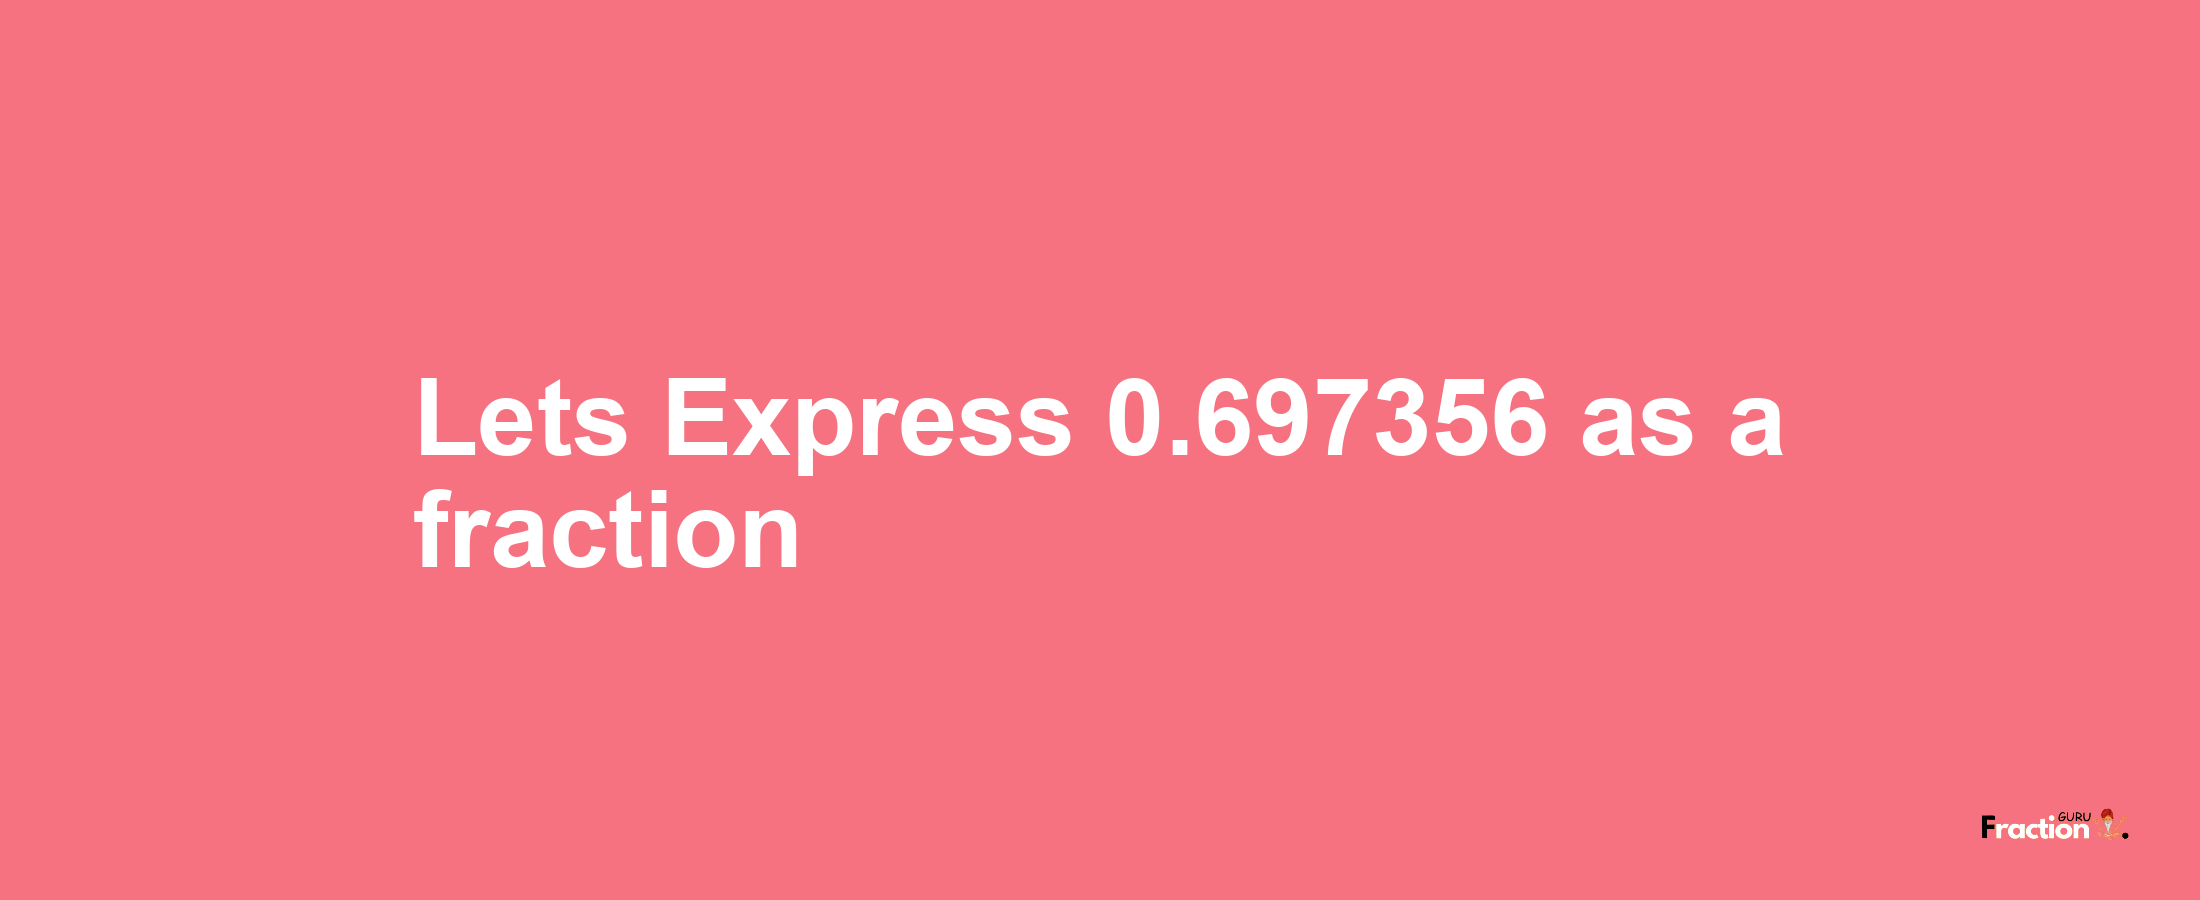 Lets Express 0.697356 as afraction